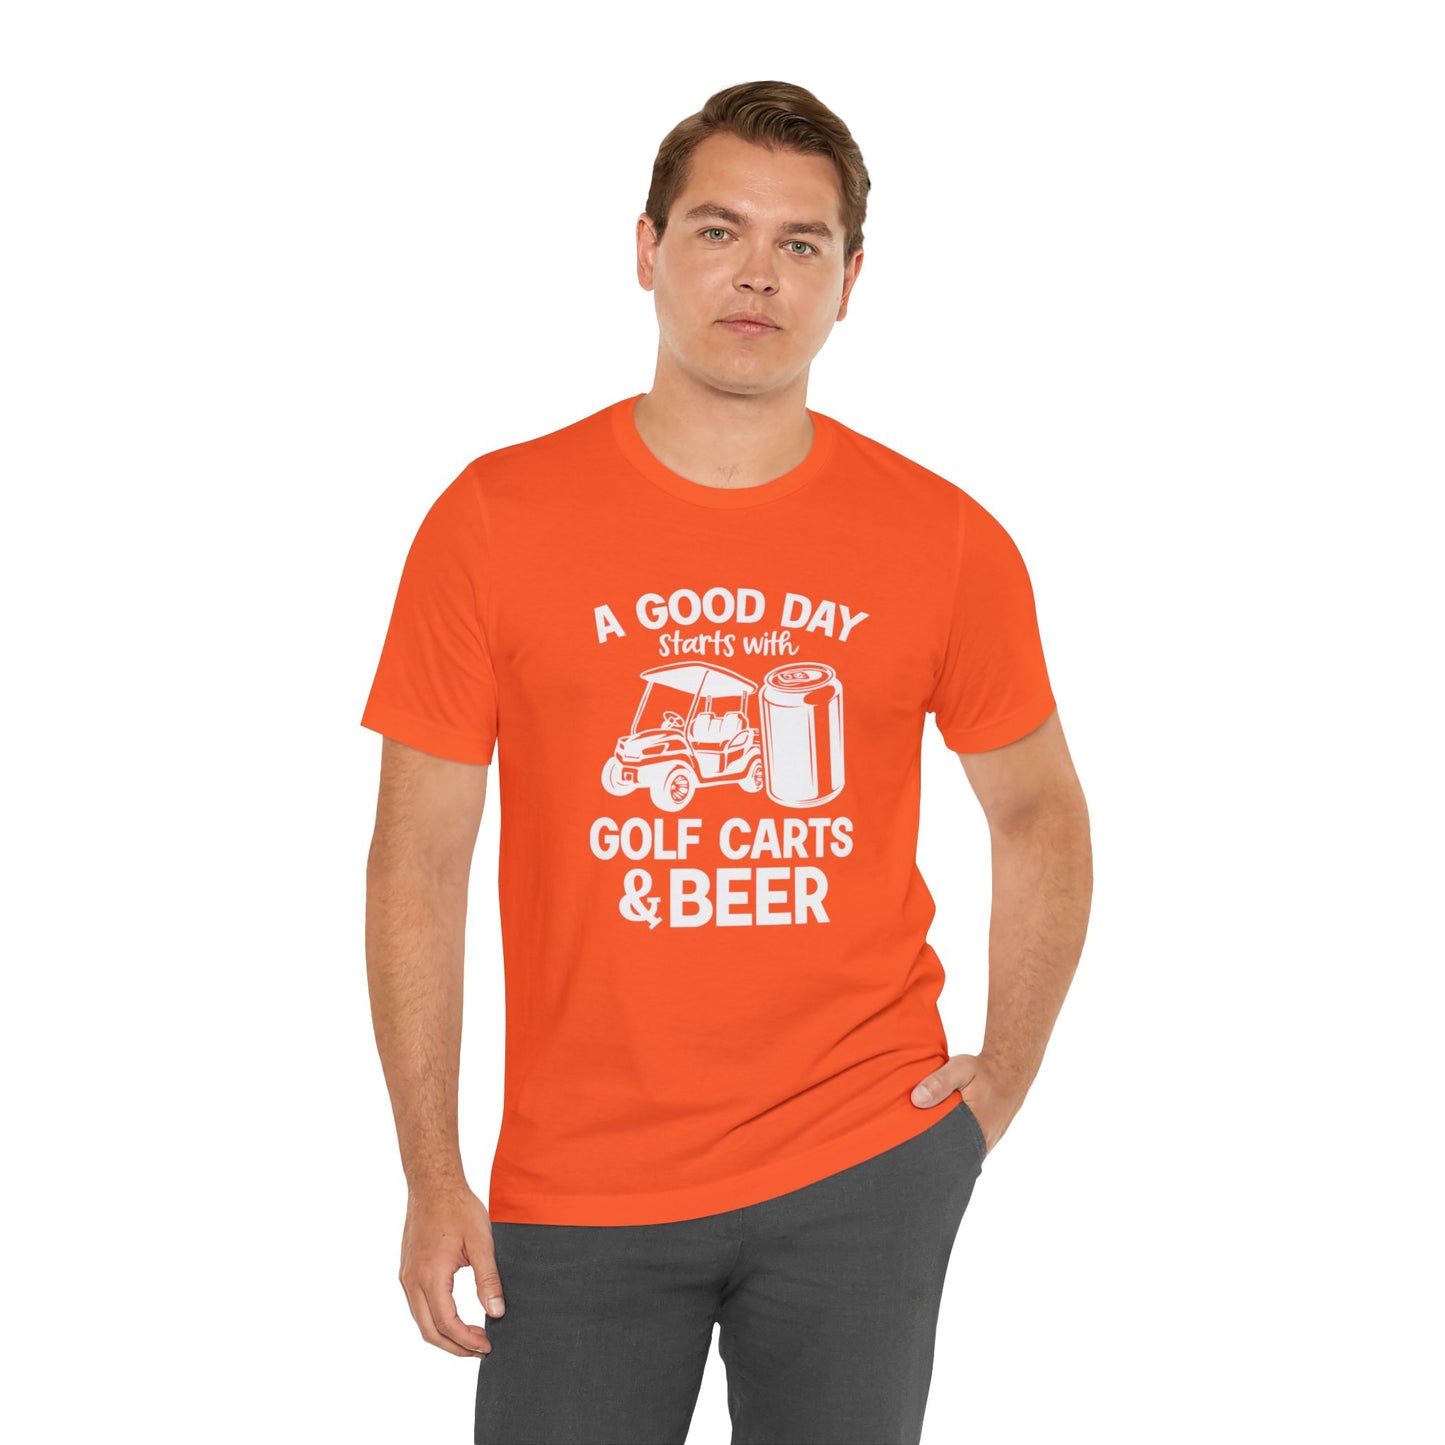 A Good Day Starts With Golf Carts And Beer T-Shirt - Short Sleeve Tee